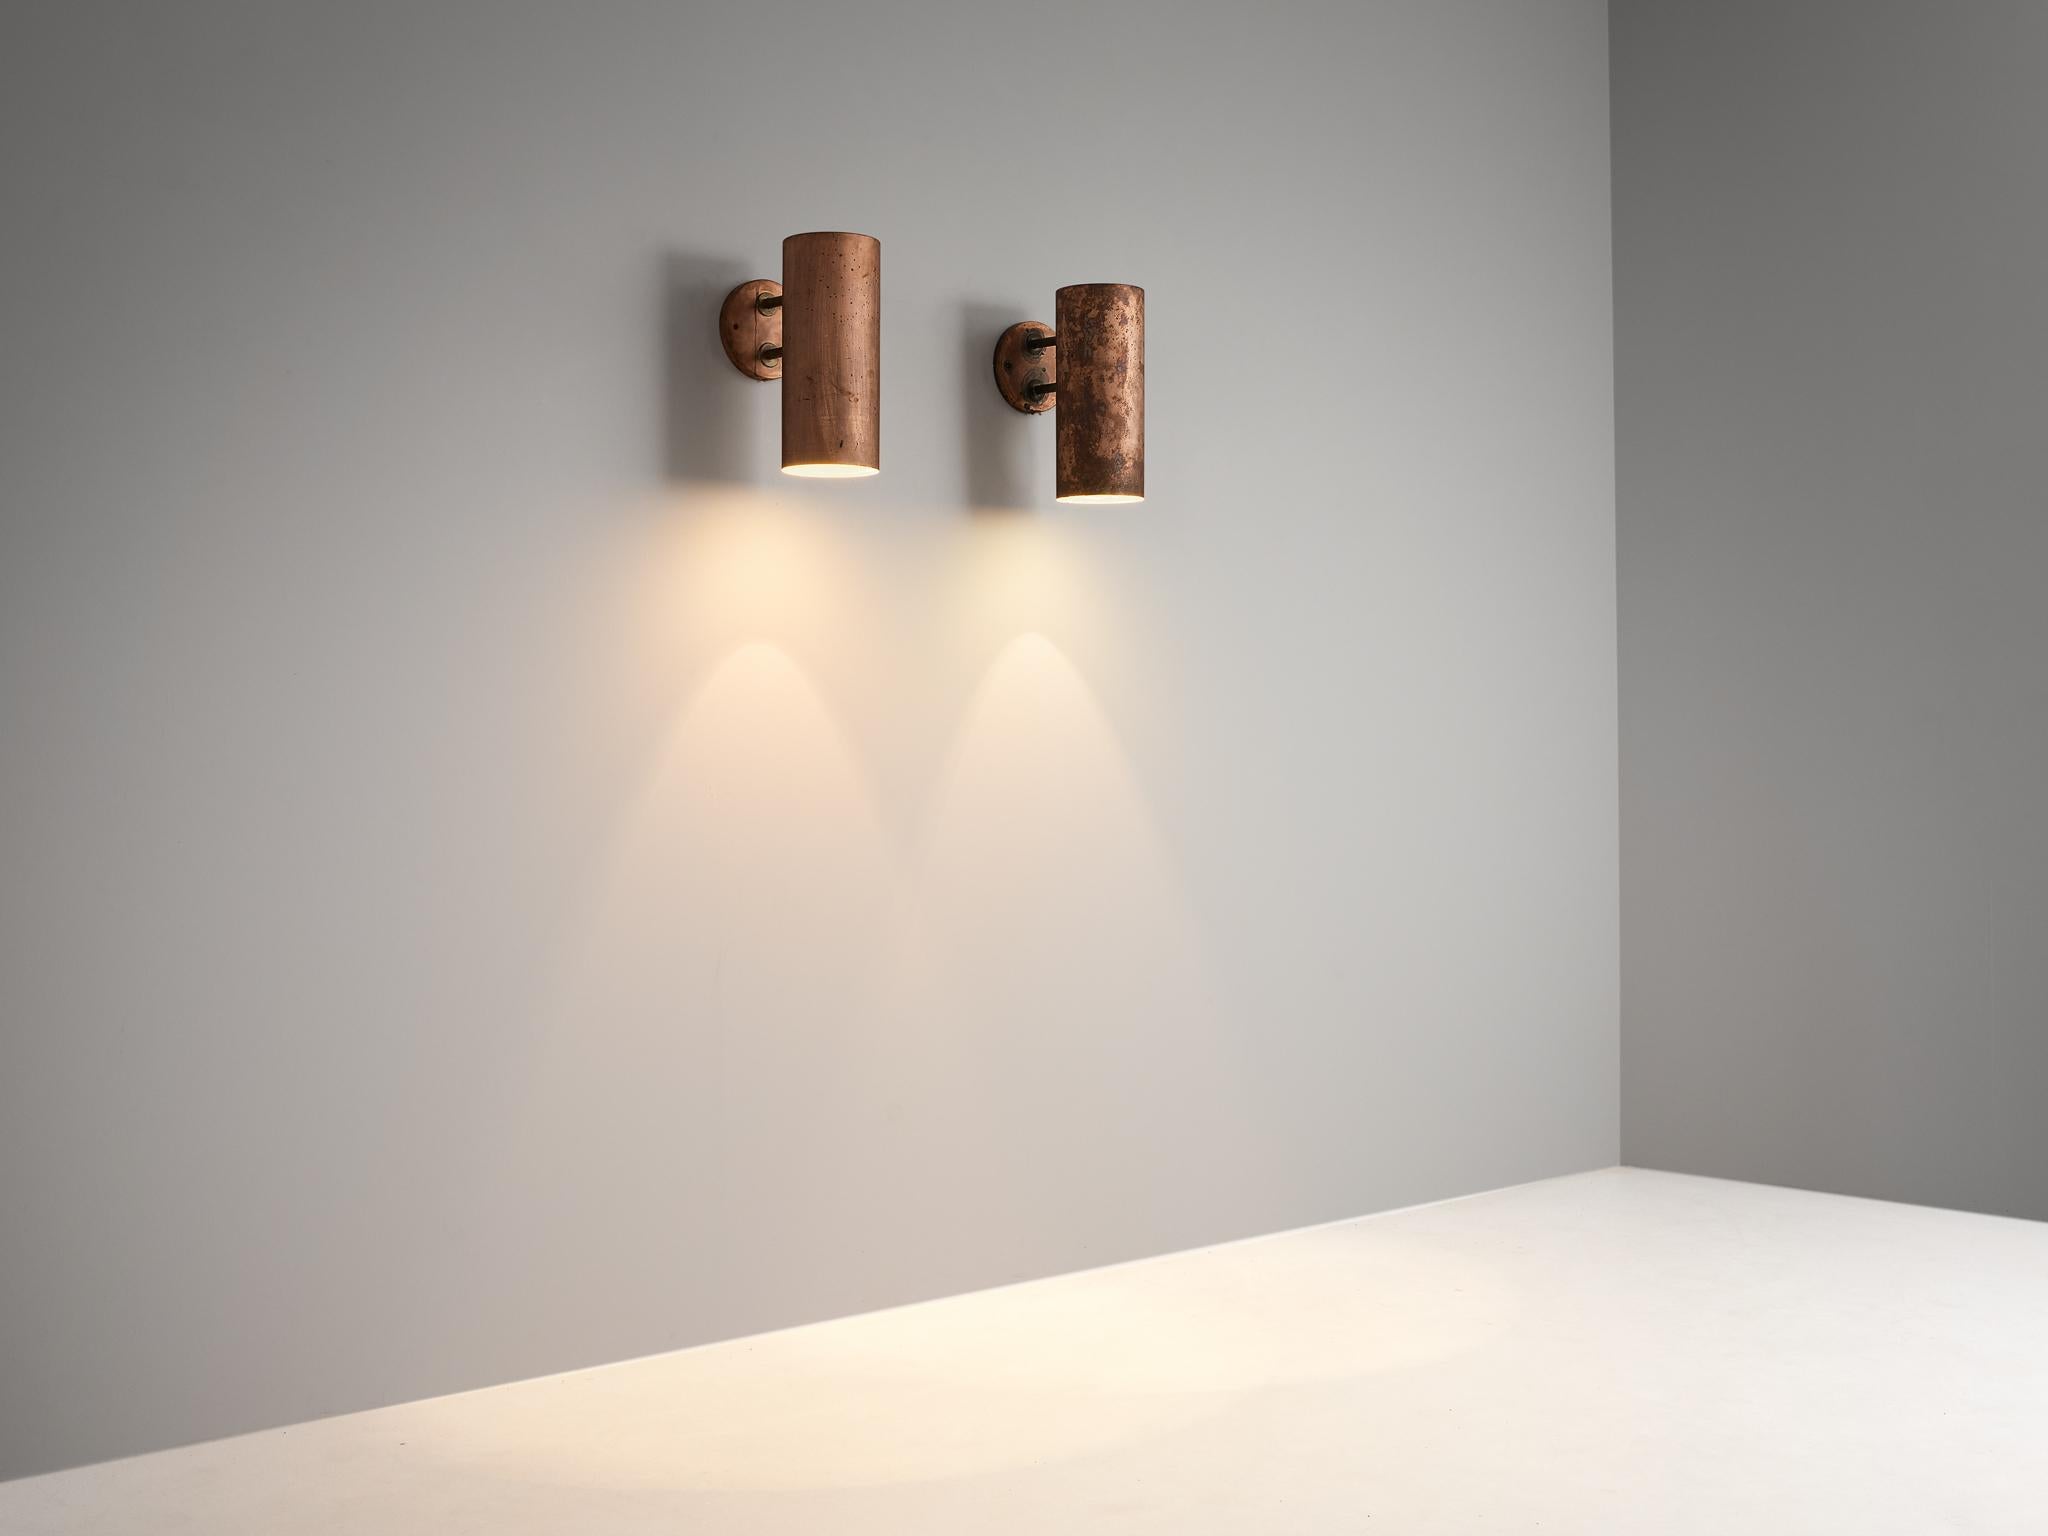 Scandinavian Modern Hans-Agne Jakobsson ‘Rulle’ Wall Lights in Patinated Copper